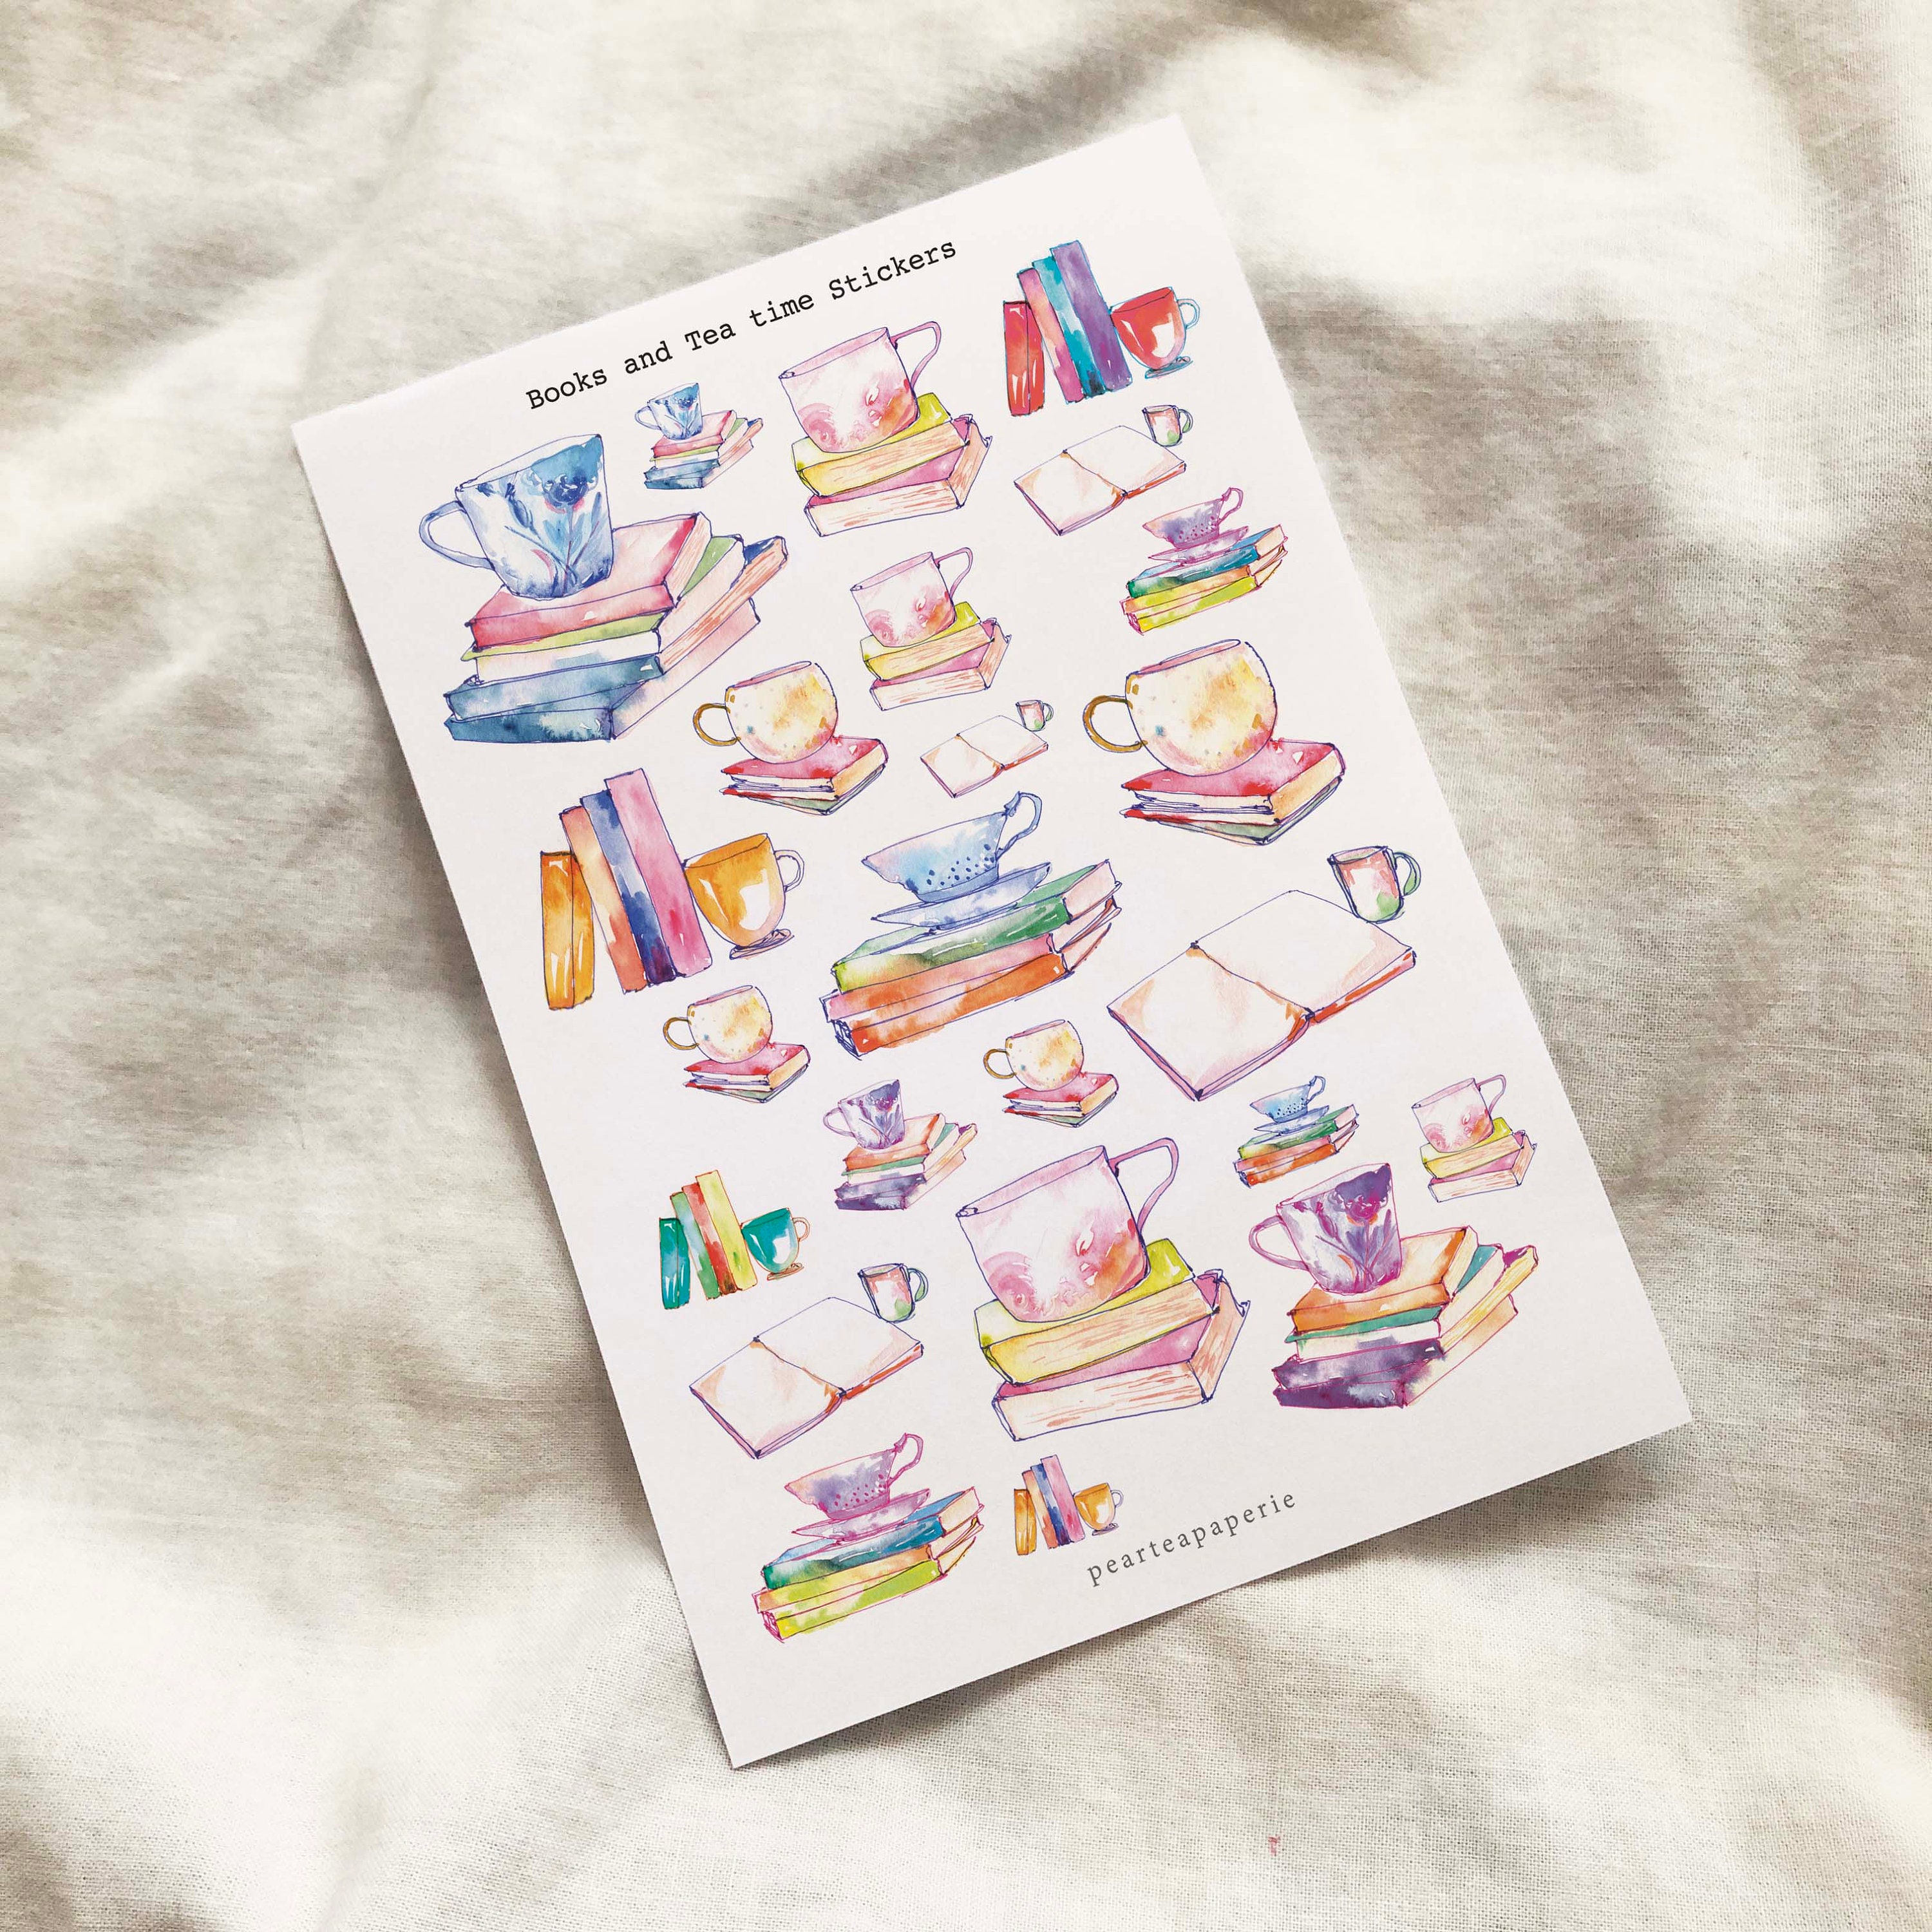 Books and Tea Time Stickers Planner Stickers Planning - Etsy